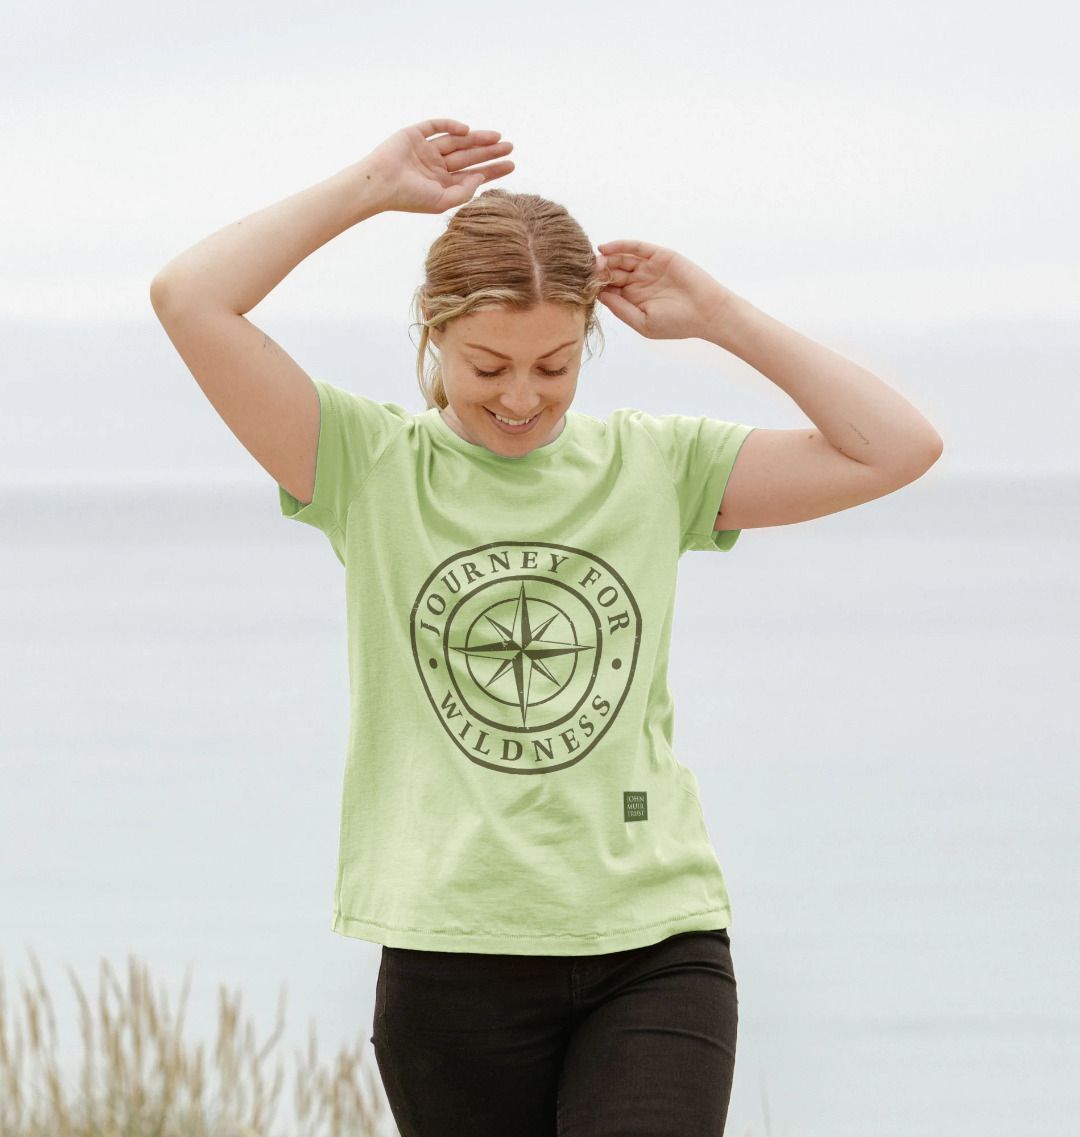 Athletic Grey Journey for Wildness Women's T-shirt (Olive logo design)